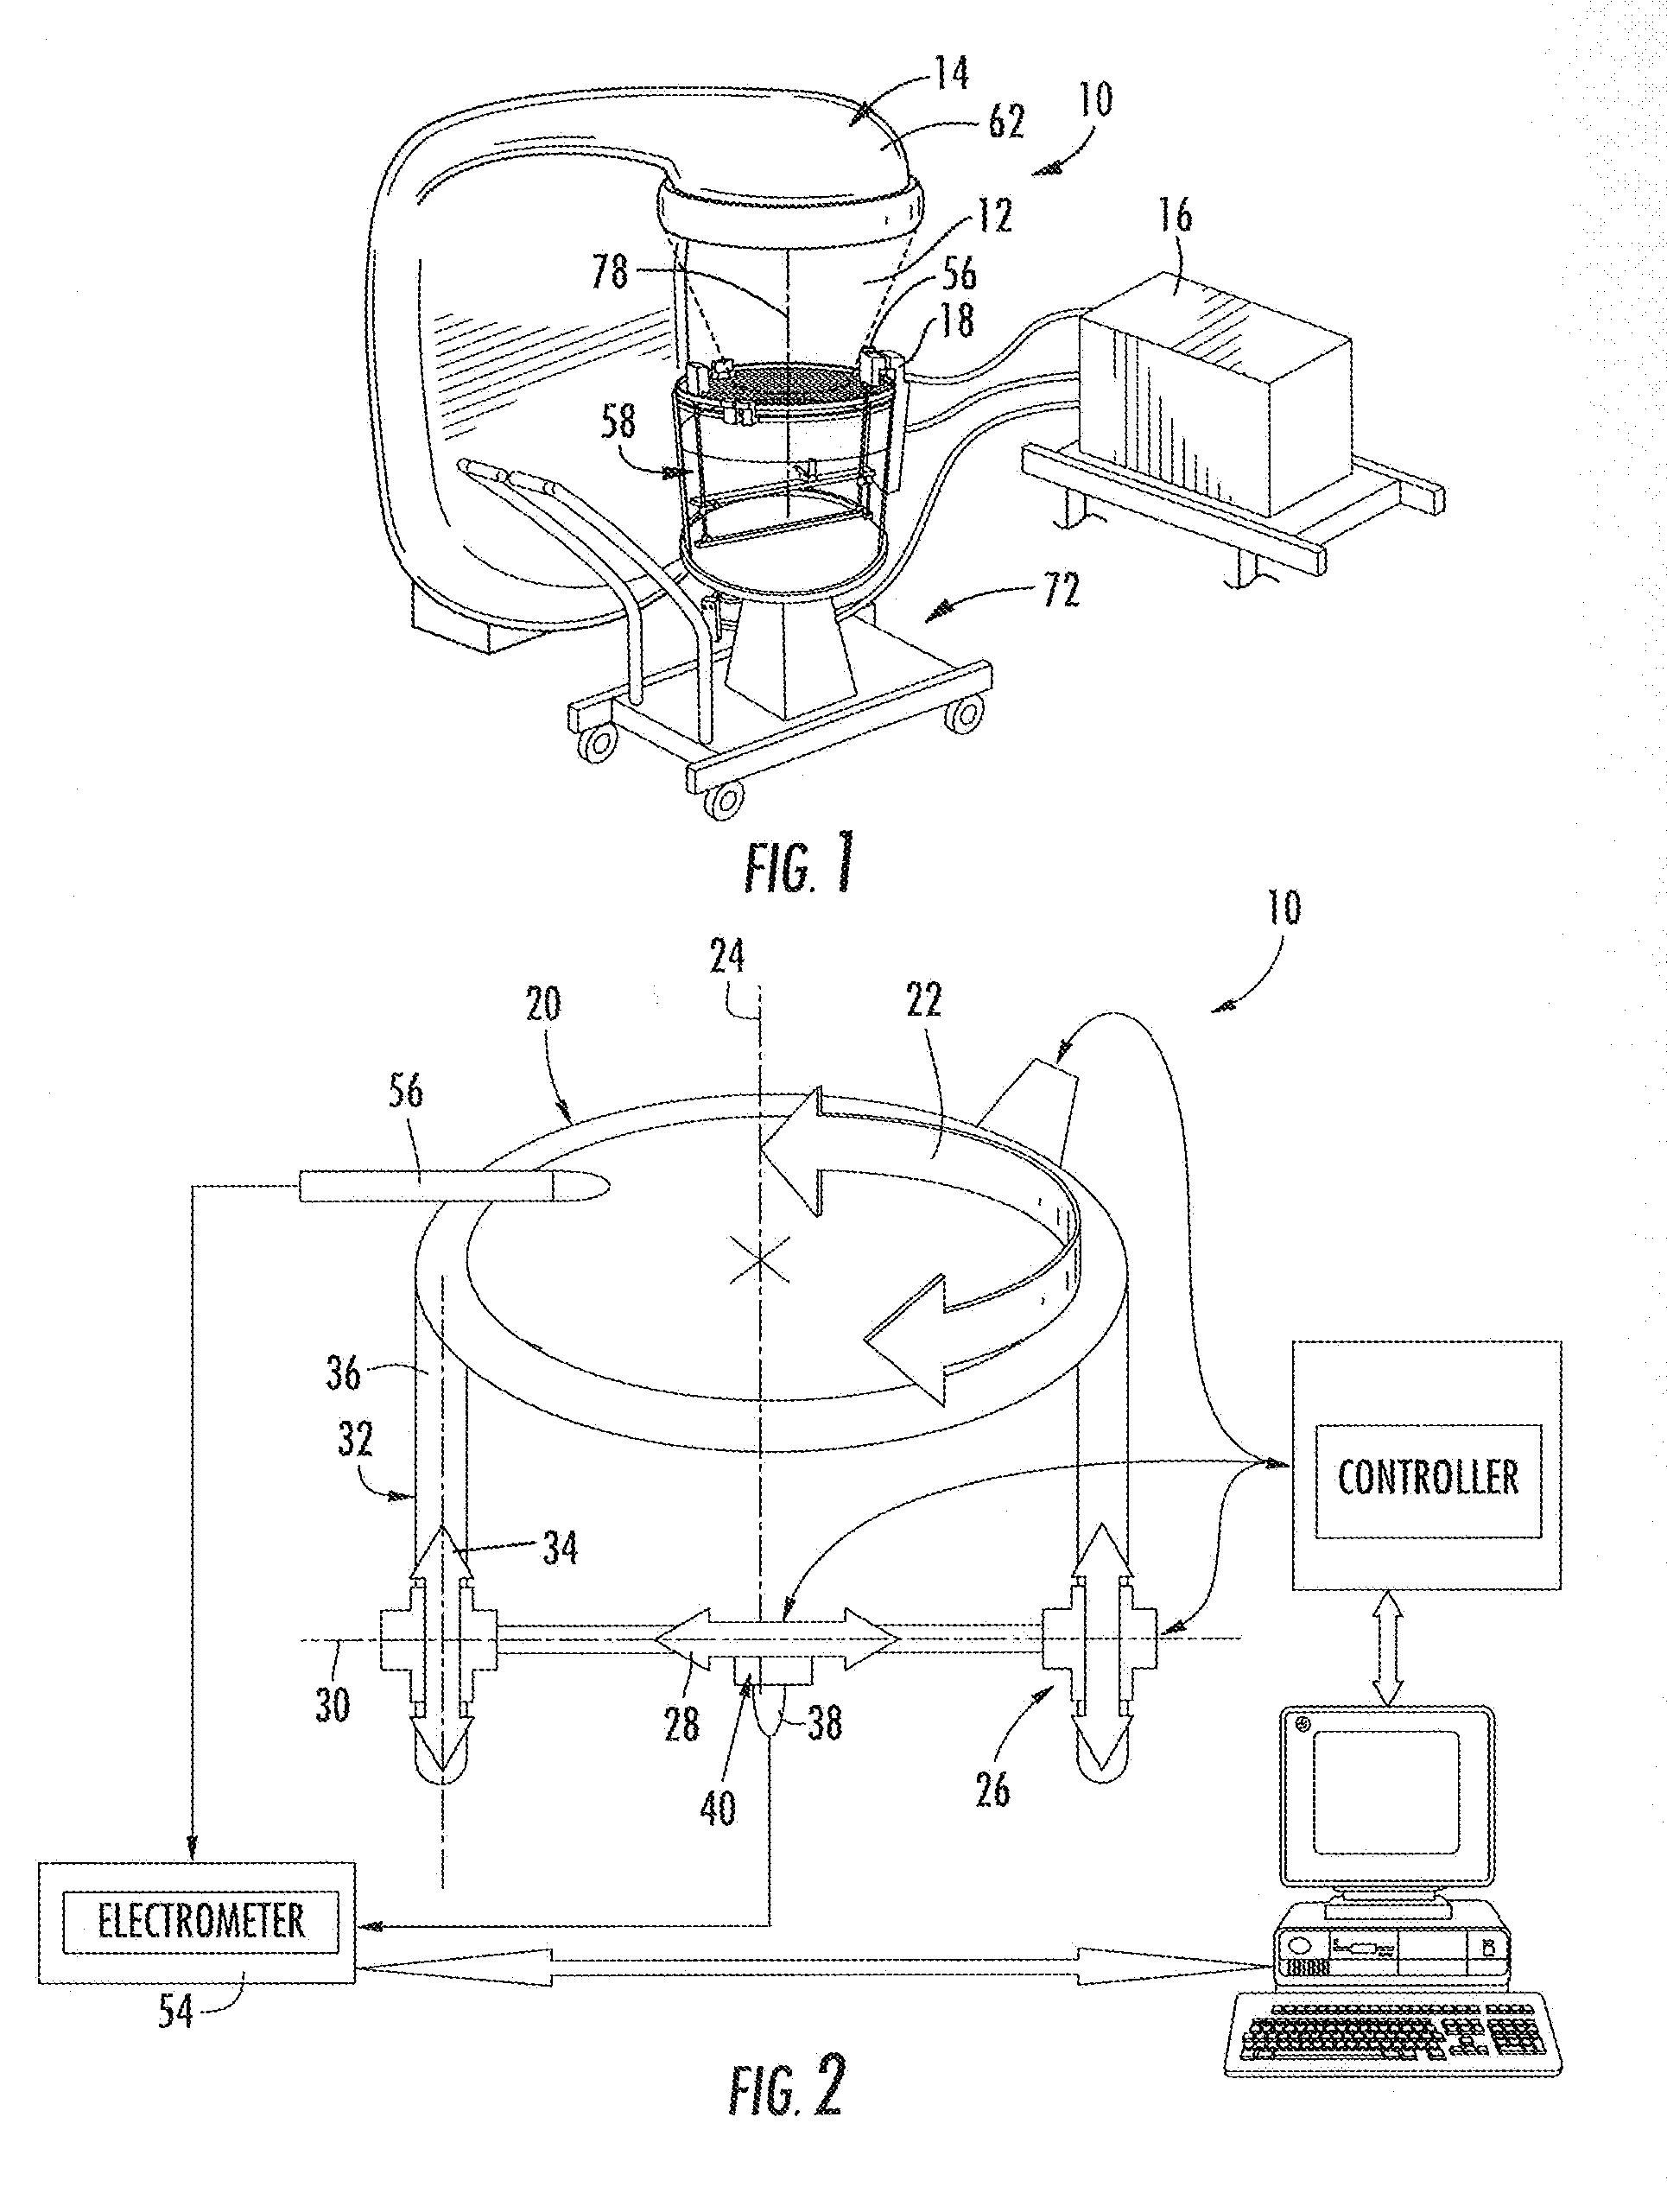 Multiple axes scanning system and method for measuring radiation from a radiation source